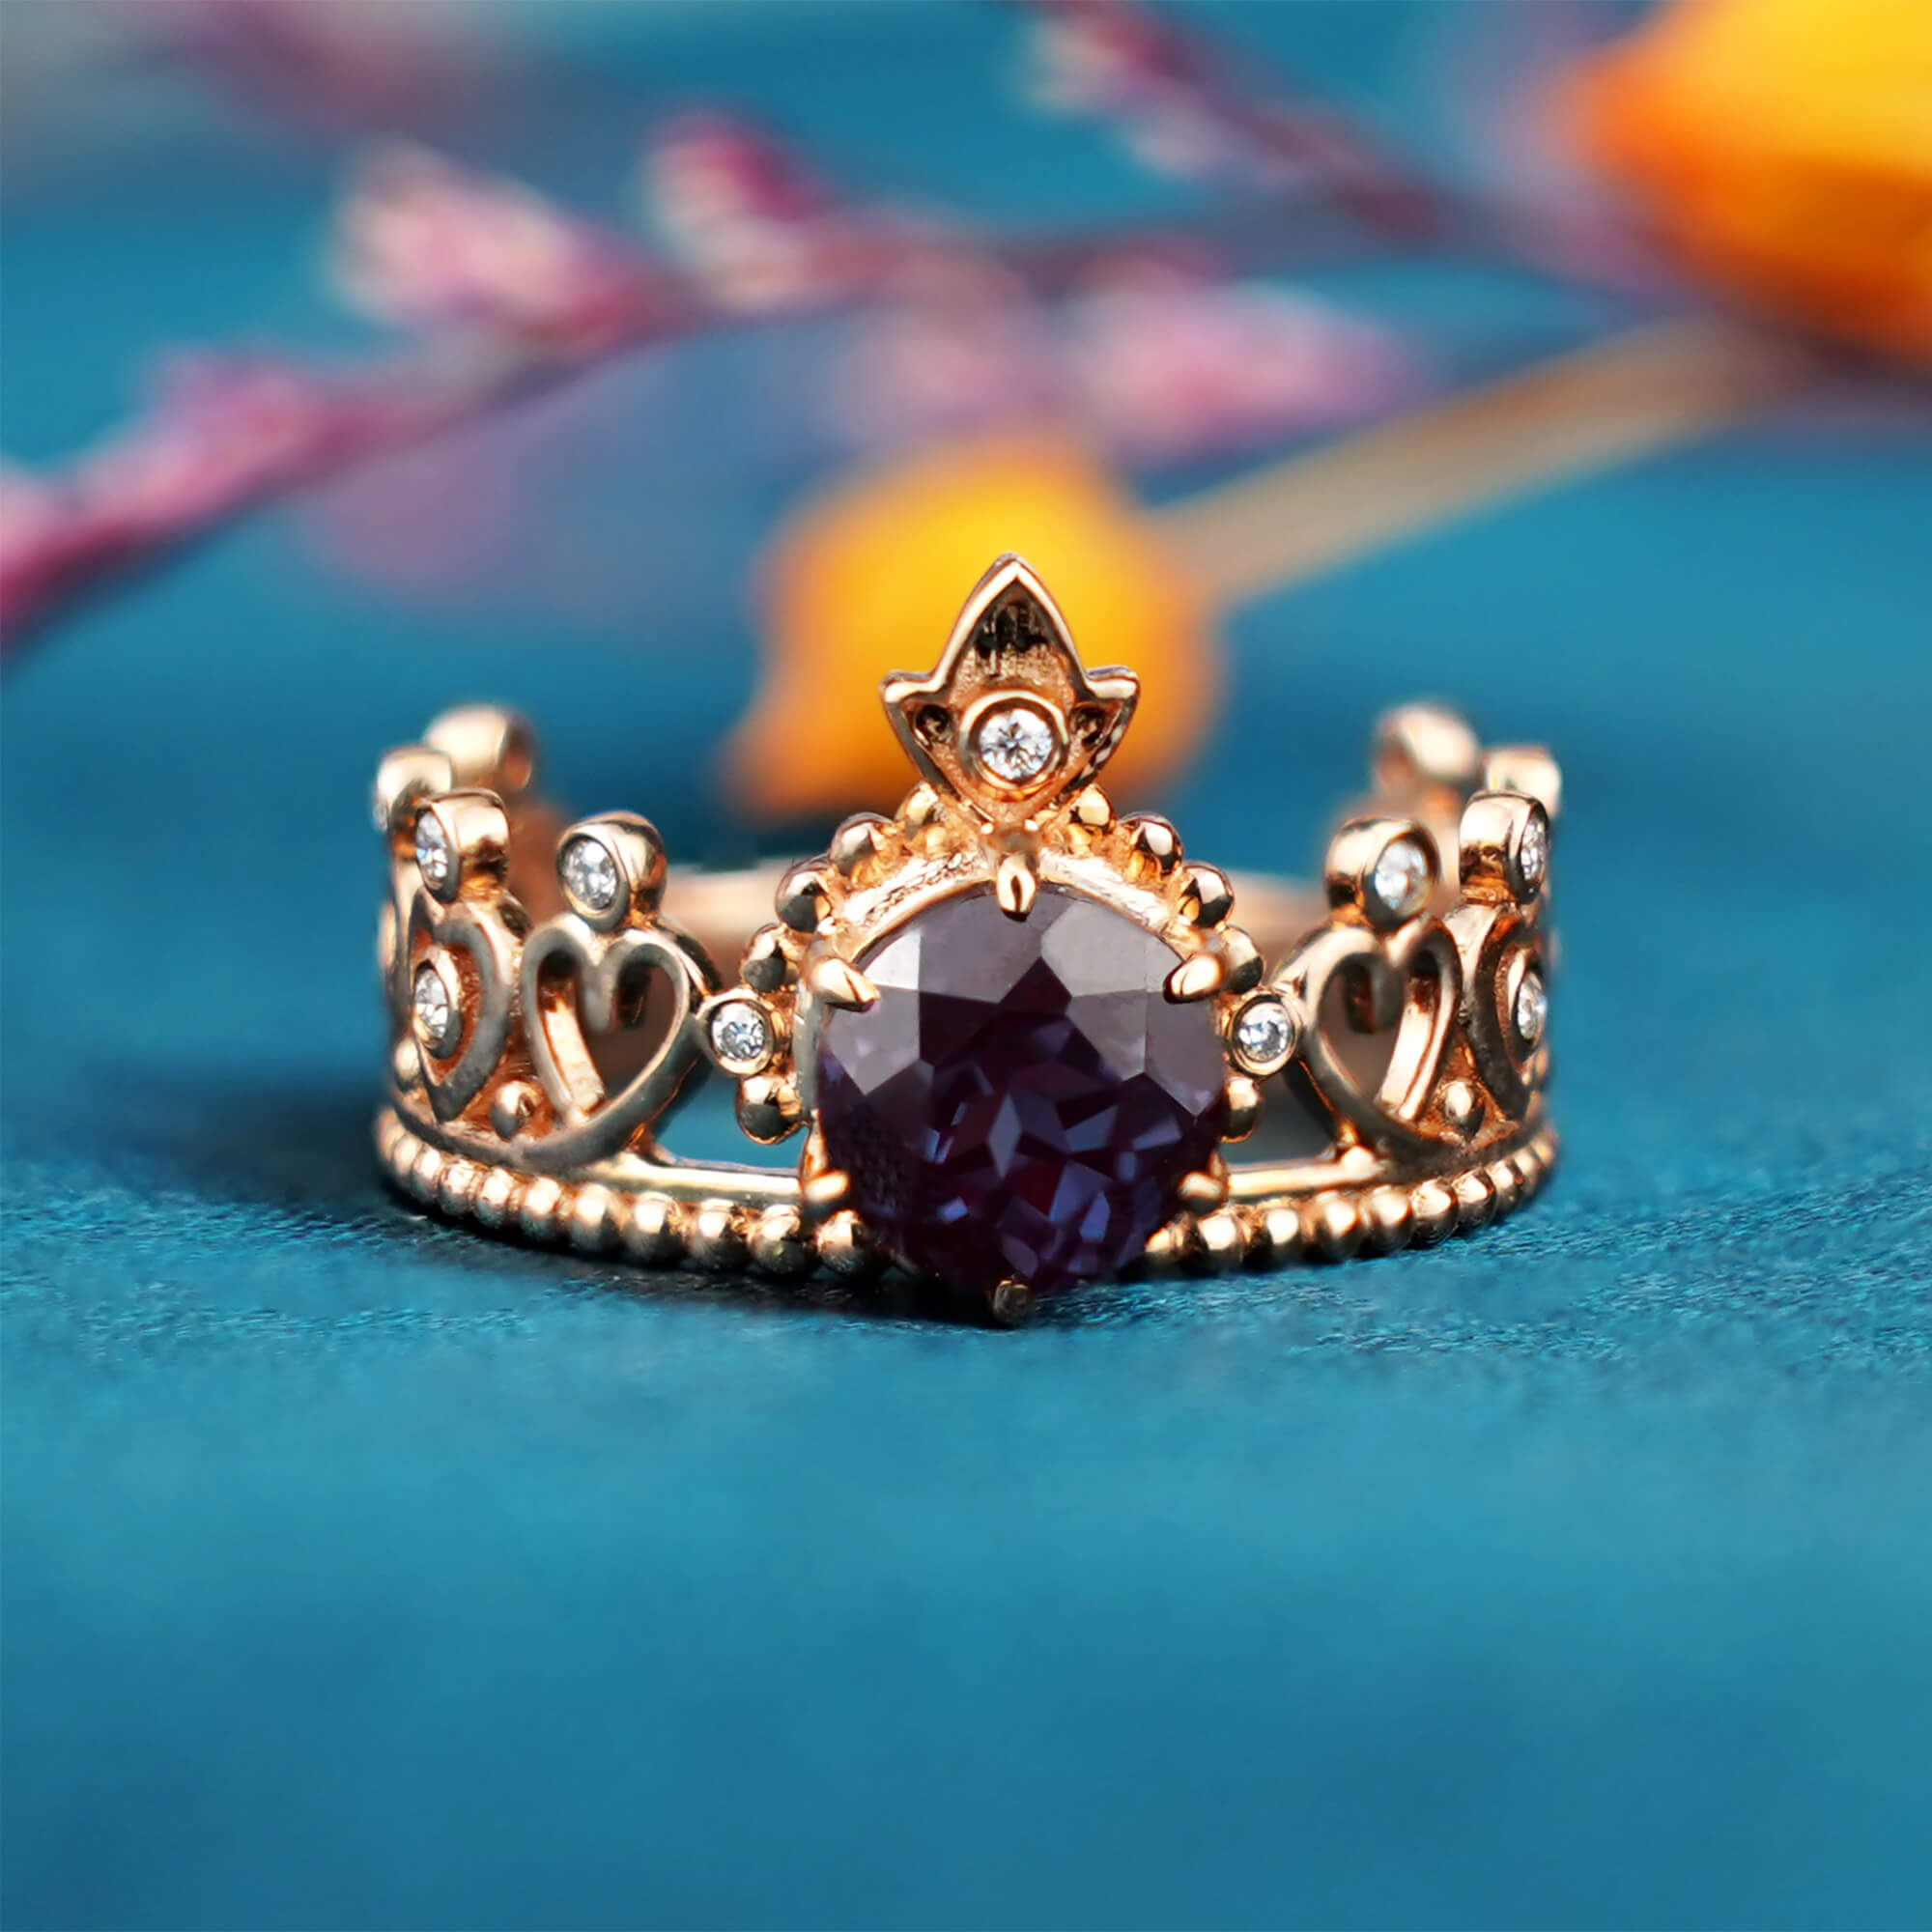 Vintage Queen Crown Engagement Ring with Round Cut Alexandrite Handcrafted Custom Promise Ring Unique Anniversary Gift Jewelry For Women